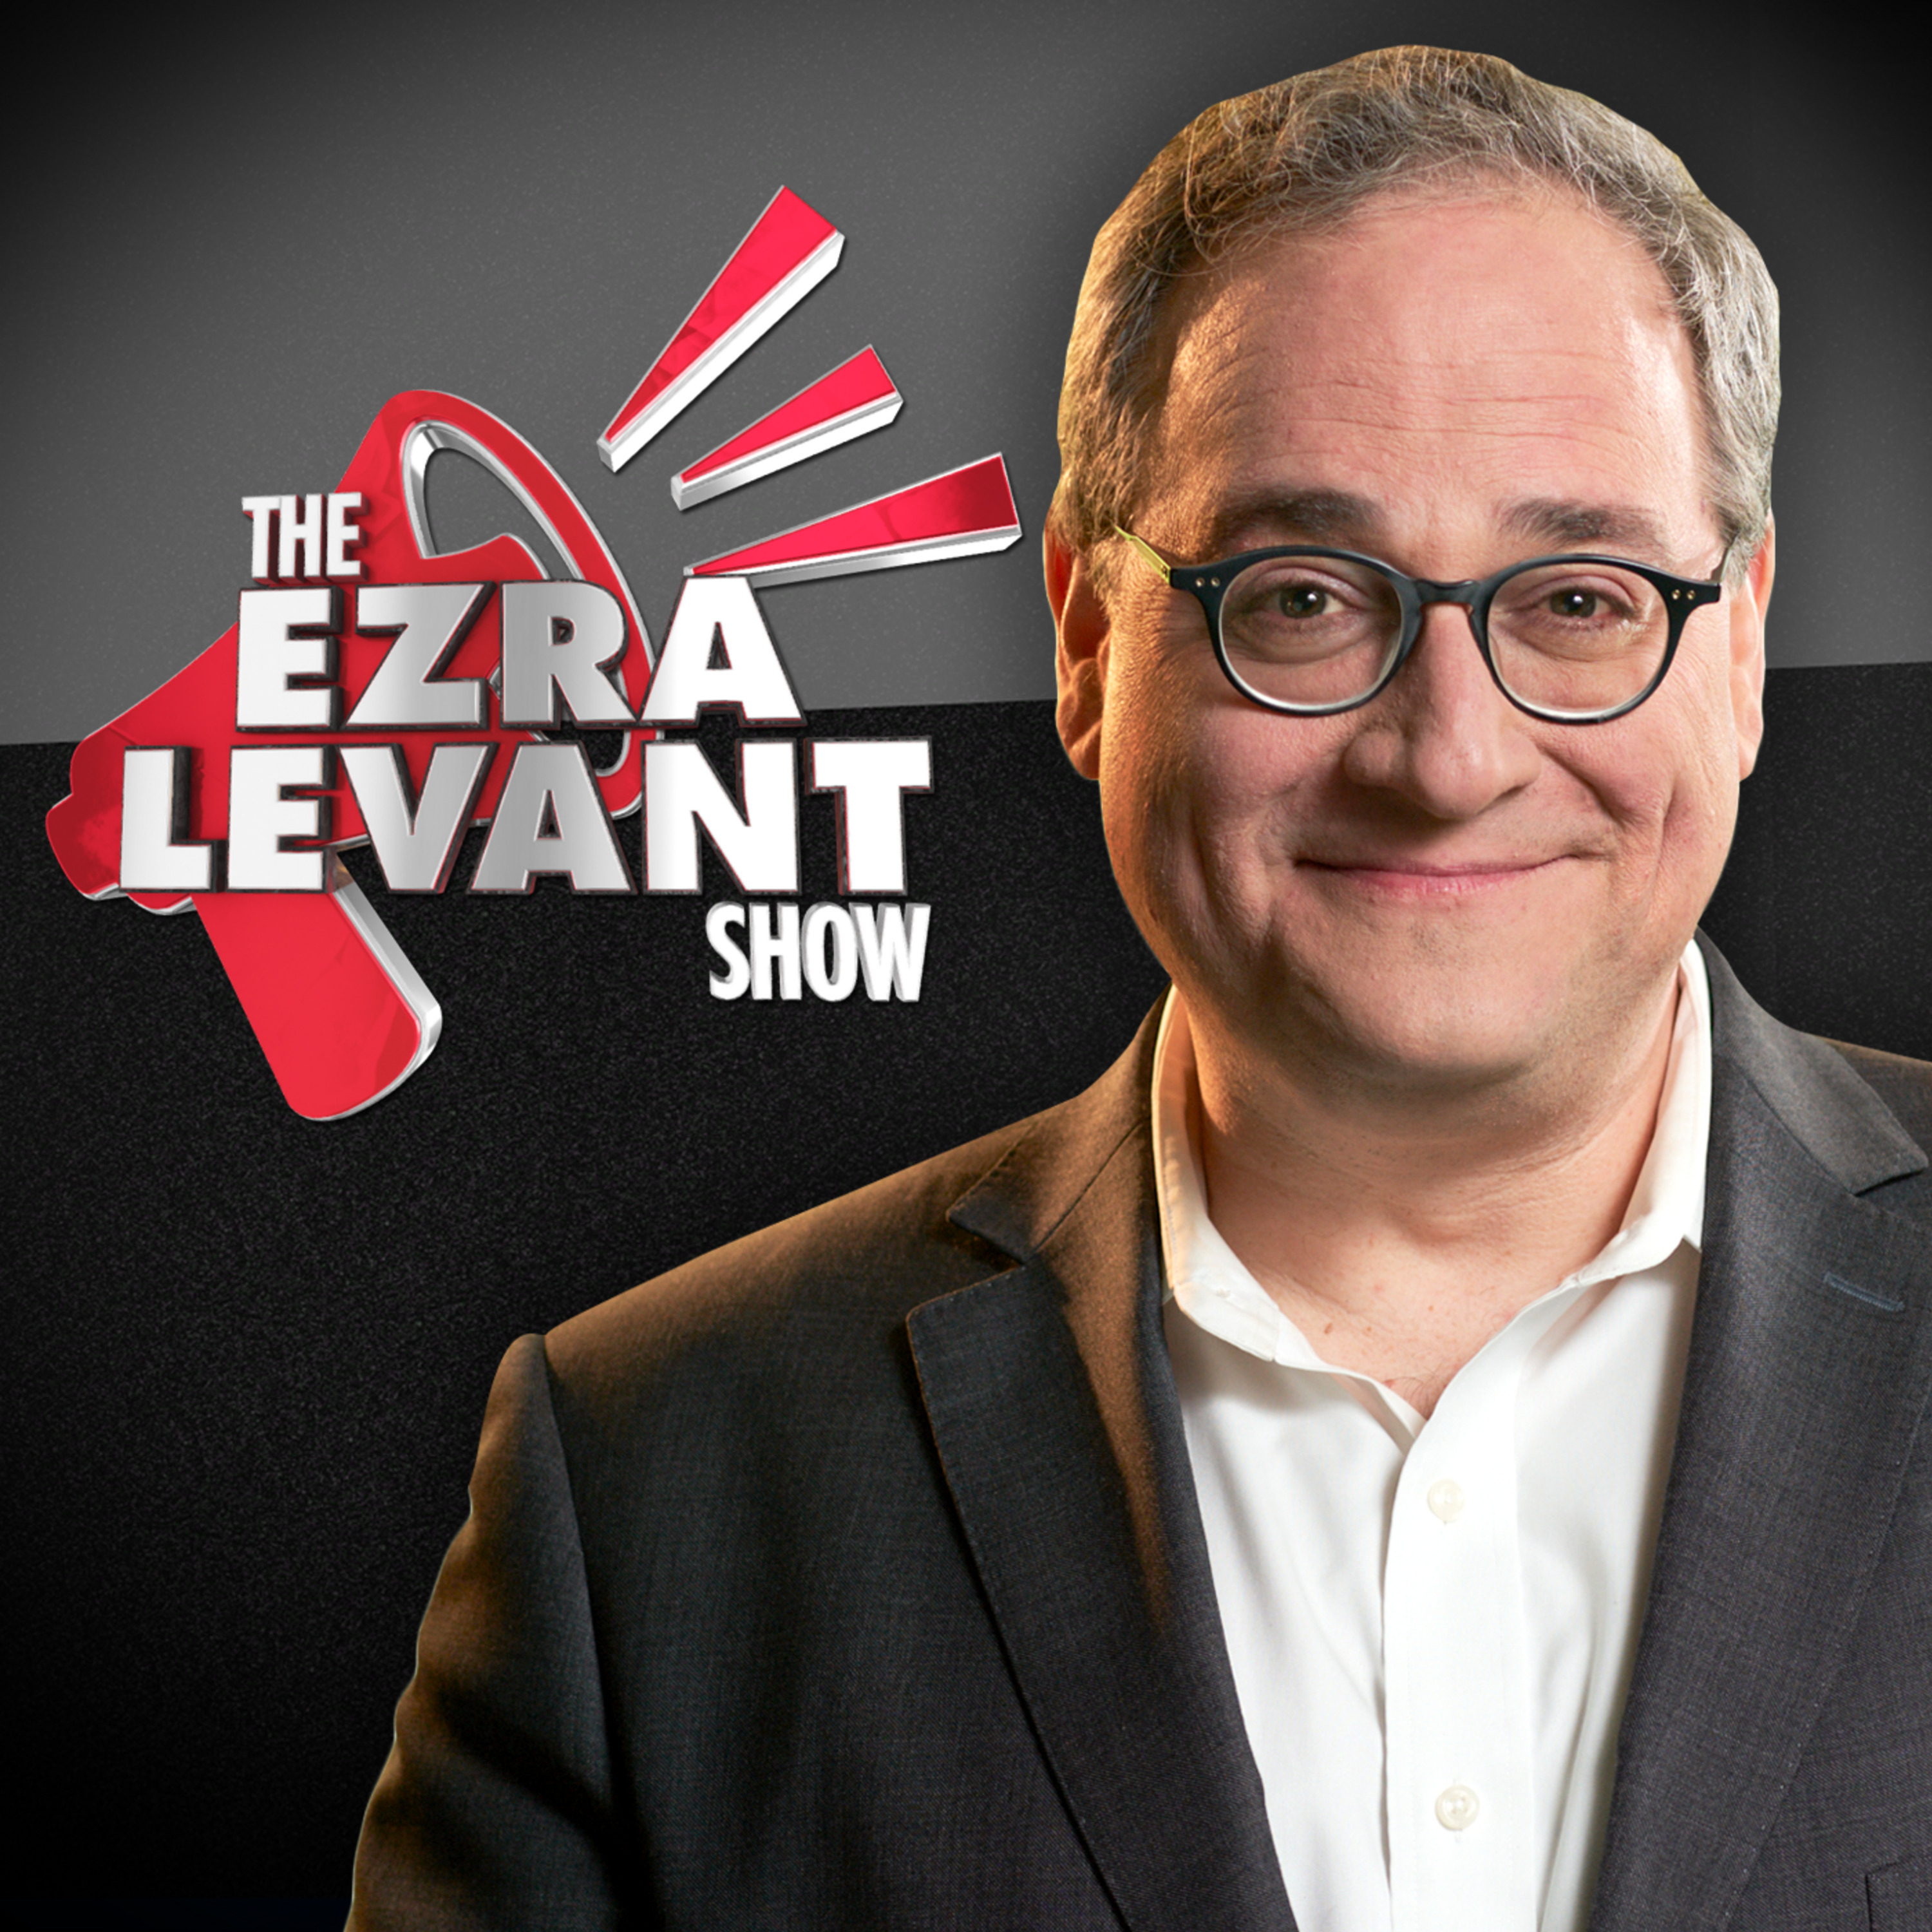 EZRA LEVANT | If you car is self-driving, can the government turn it off for climate reasons?